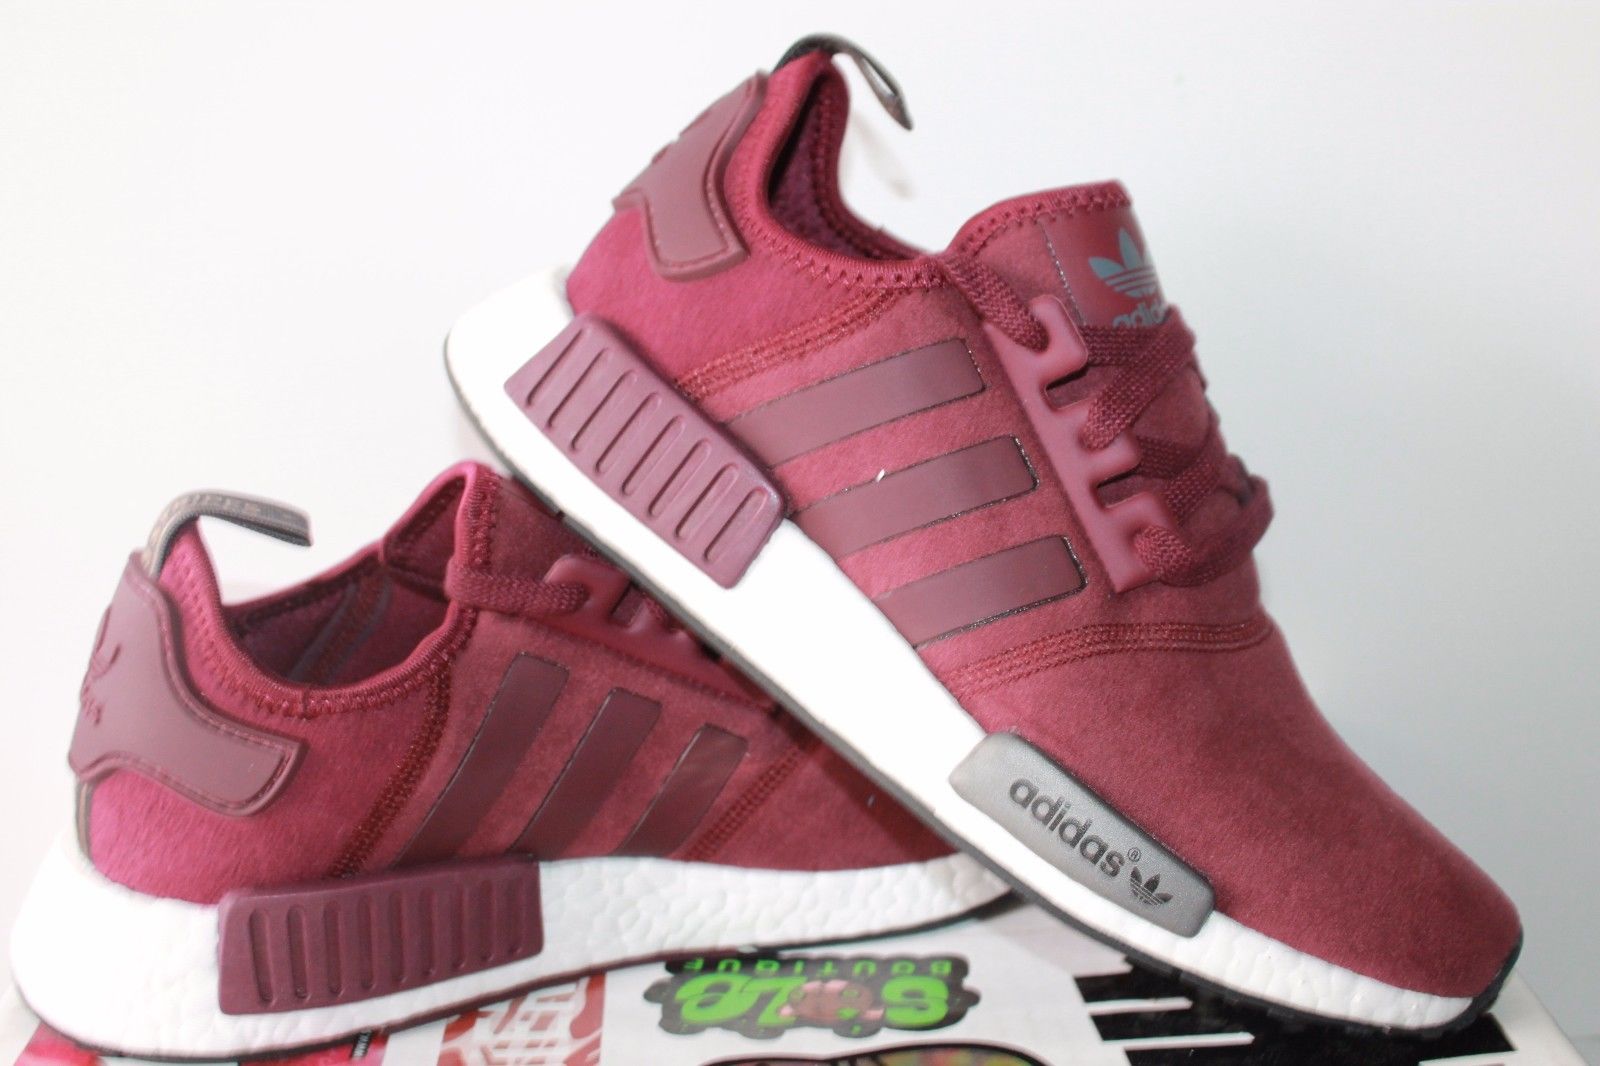 adidas womens shoes adidas womens nmd r1 nomad runner burgundy red new shoes size 8 GCJAKXP